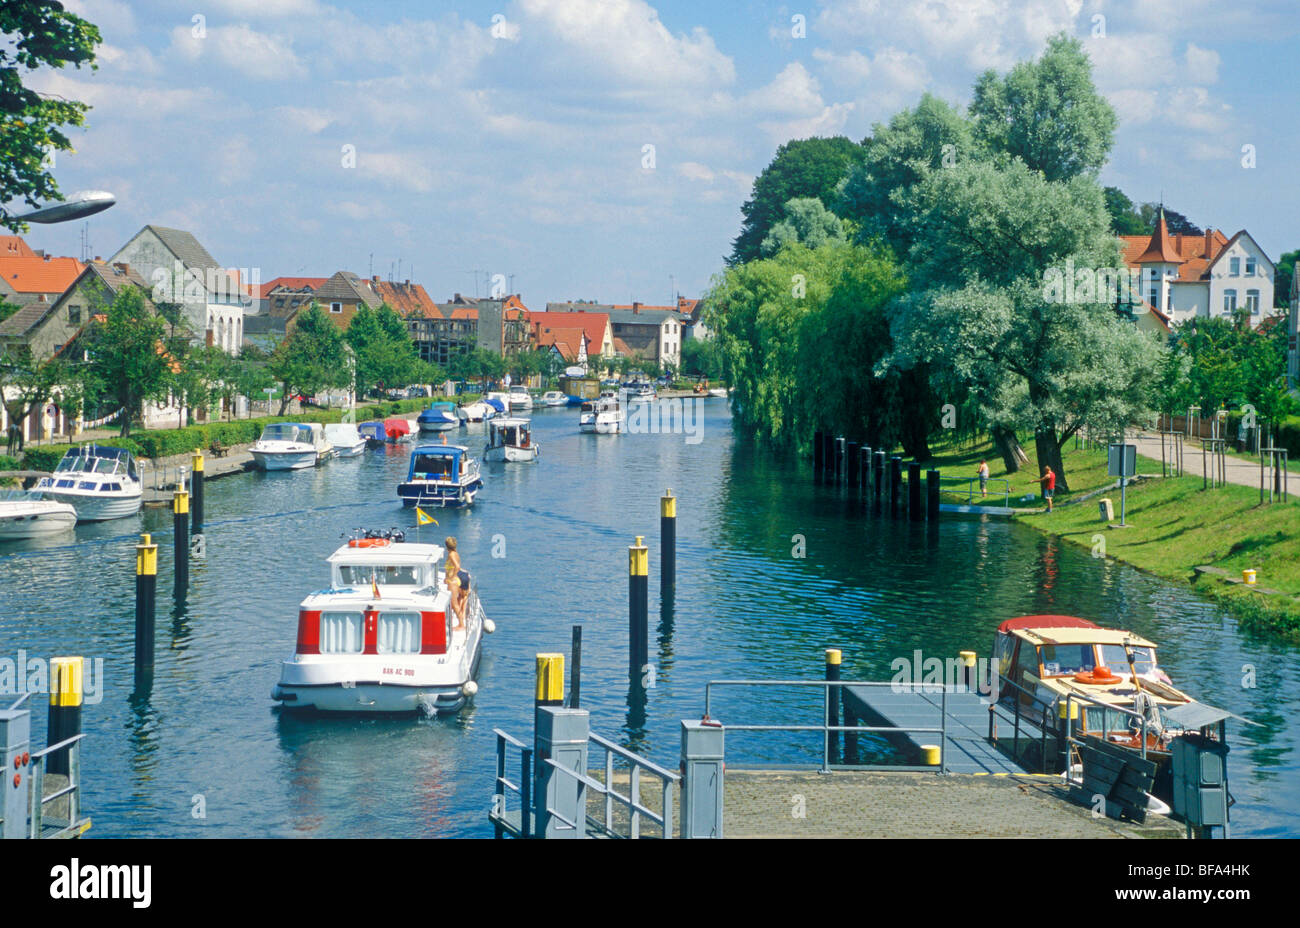 boats leaving the lock in Plau am See, Mecklenburg Lakes, Mecklenburg-West Pomerania, Germany Stock Photo